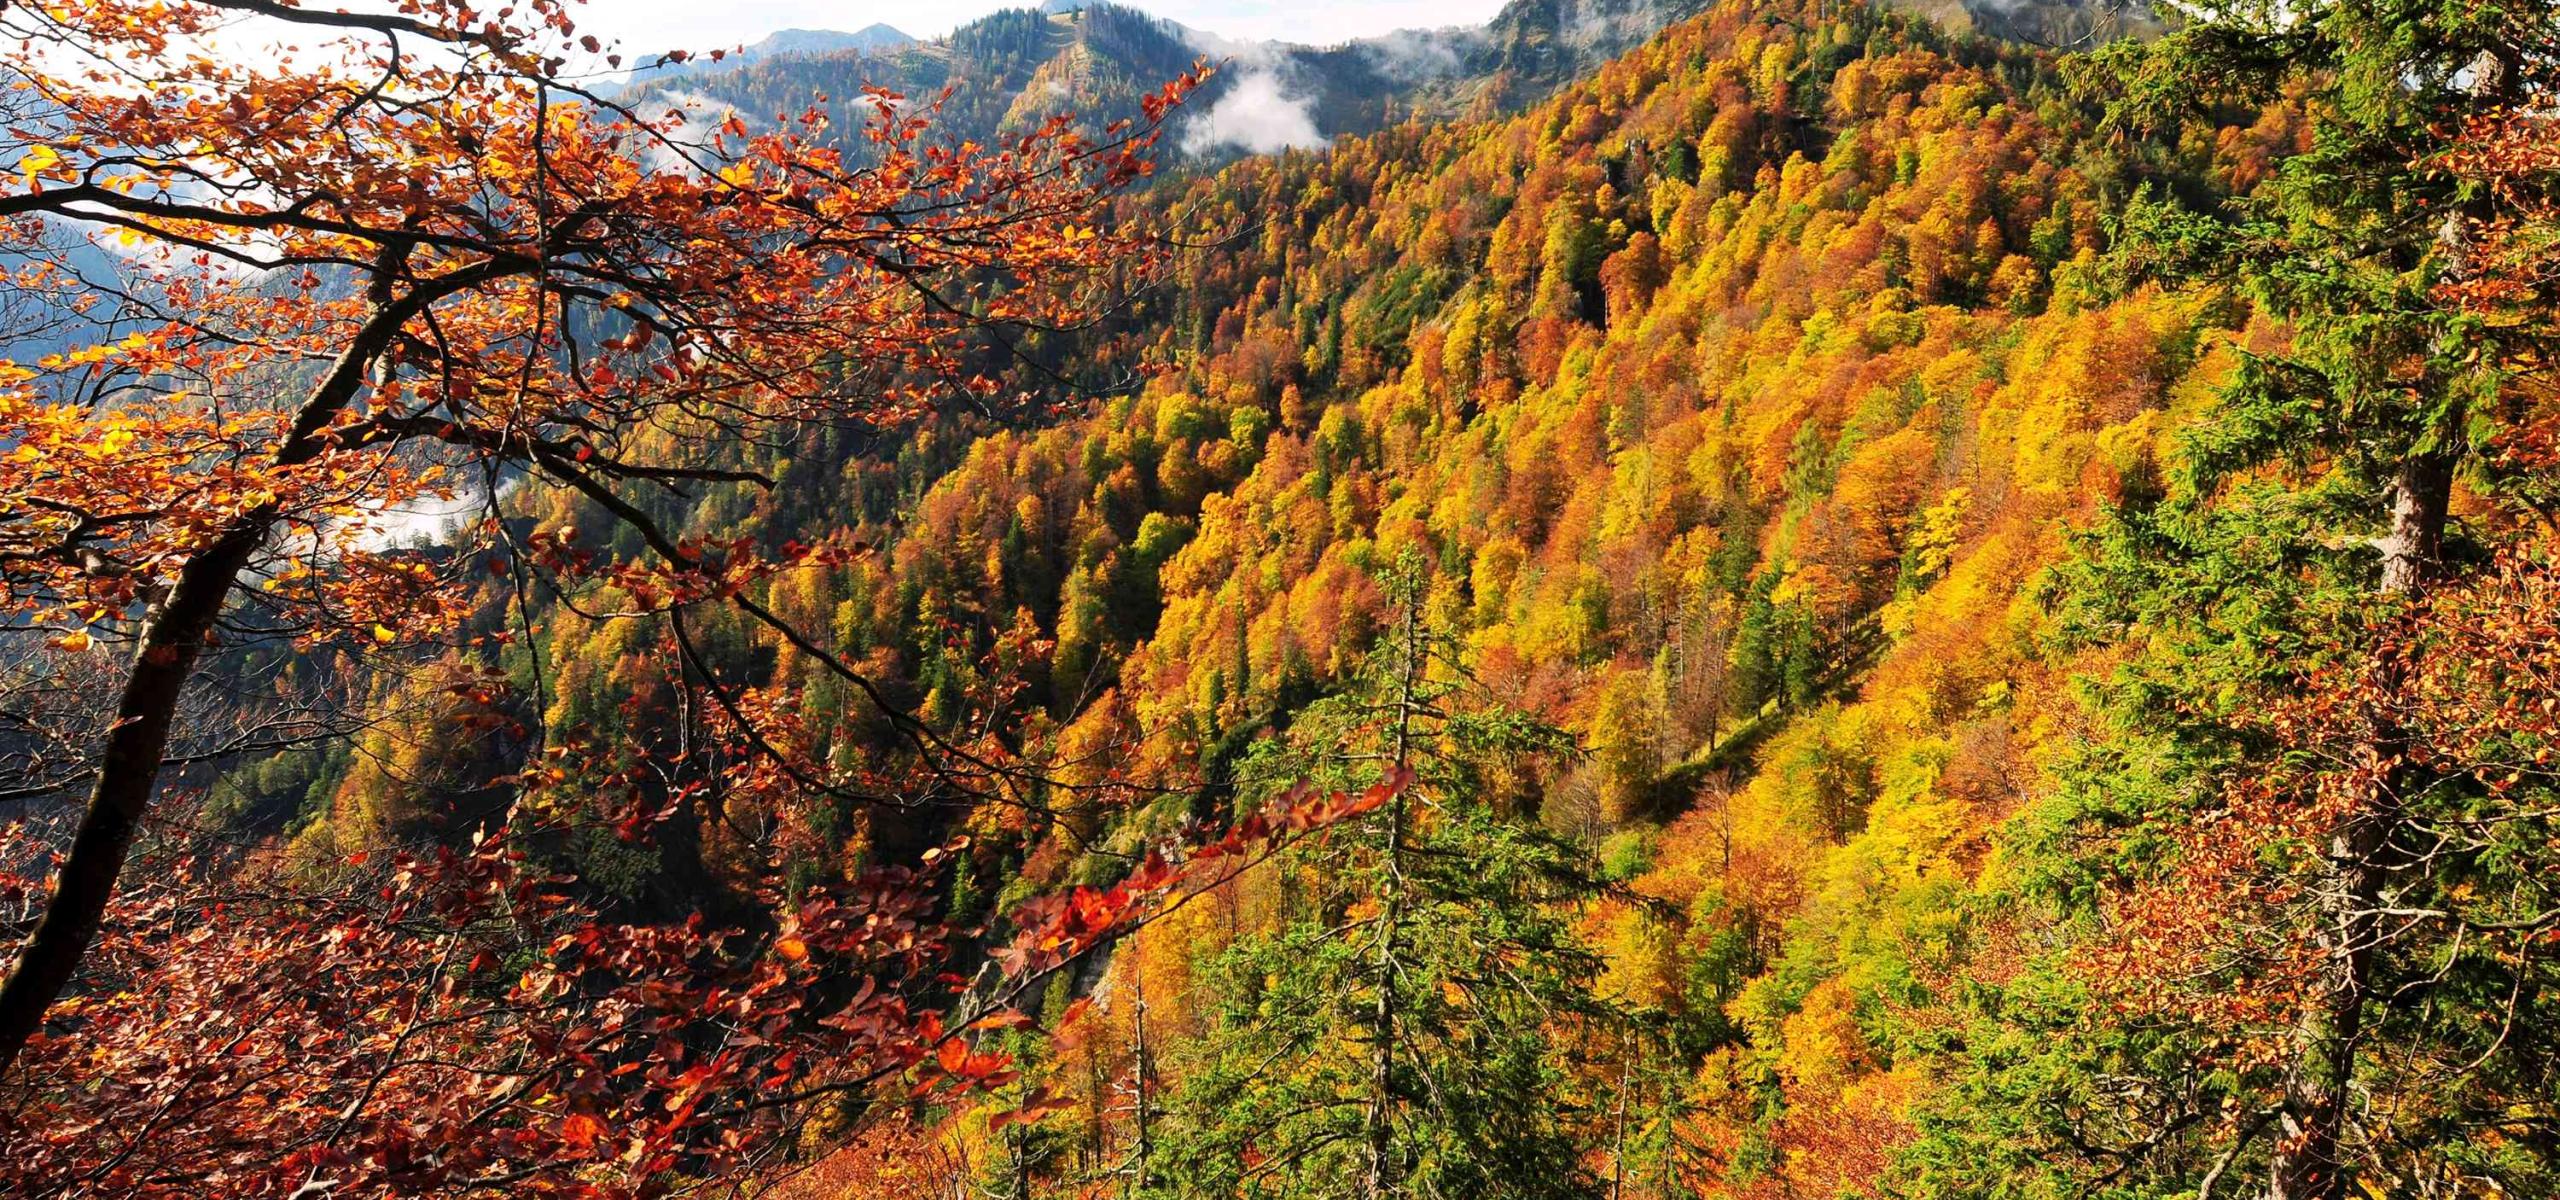 Autumn-colored beech forest